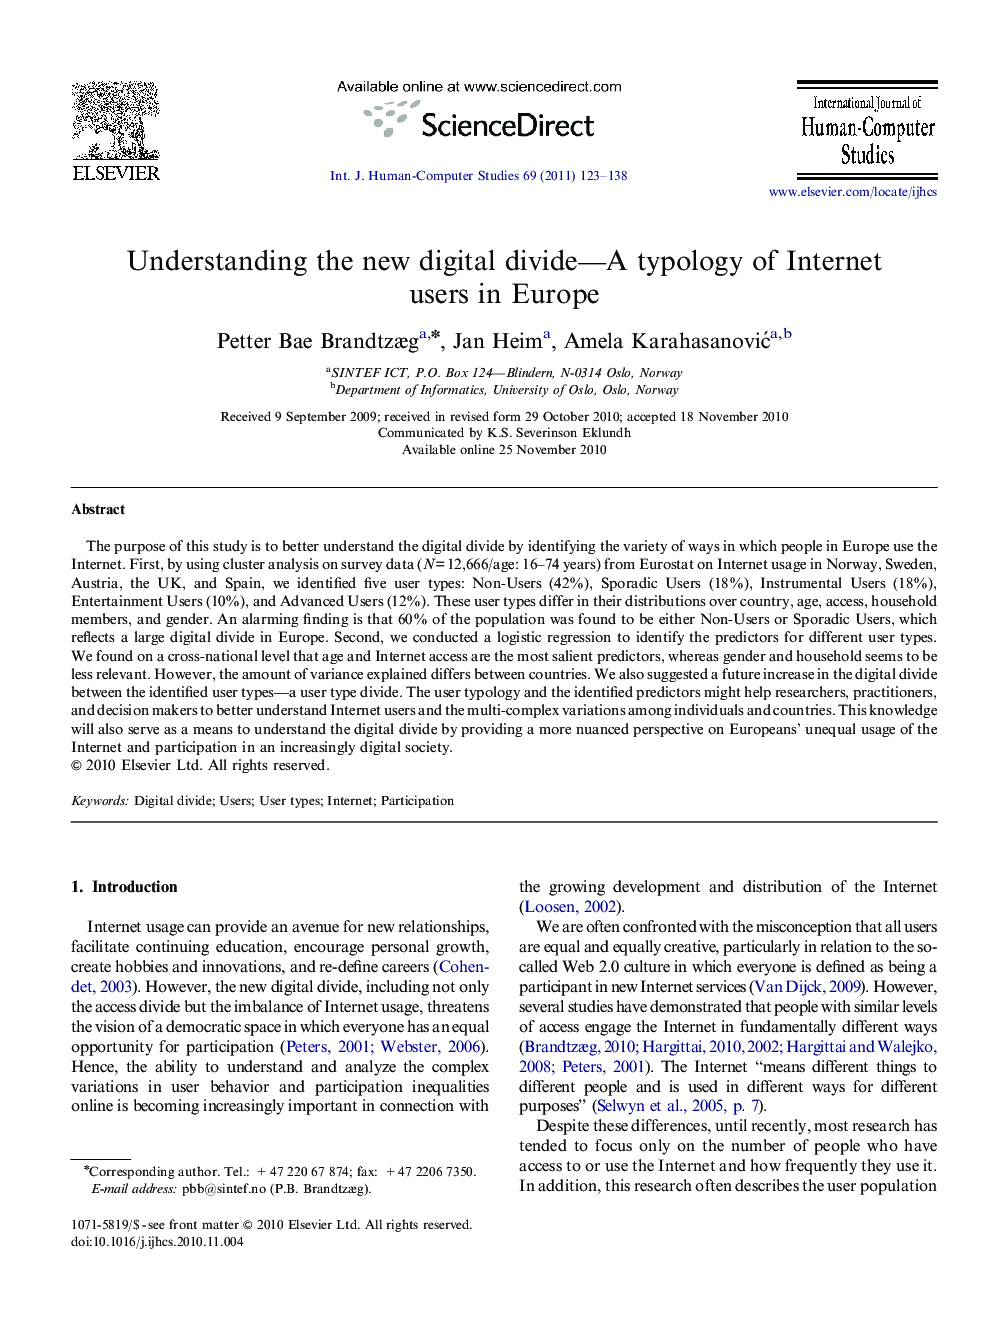 Understanding the new digital divide—A typology of Internet users in Europe